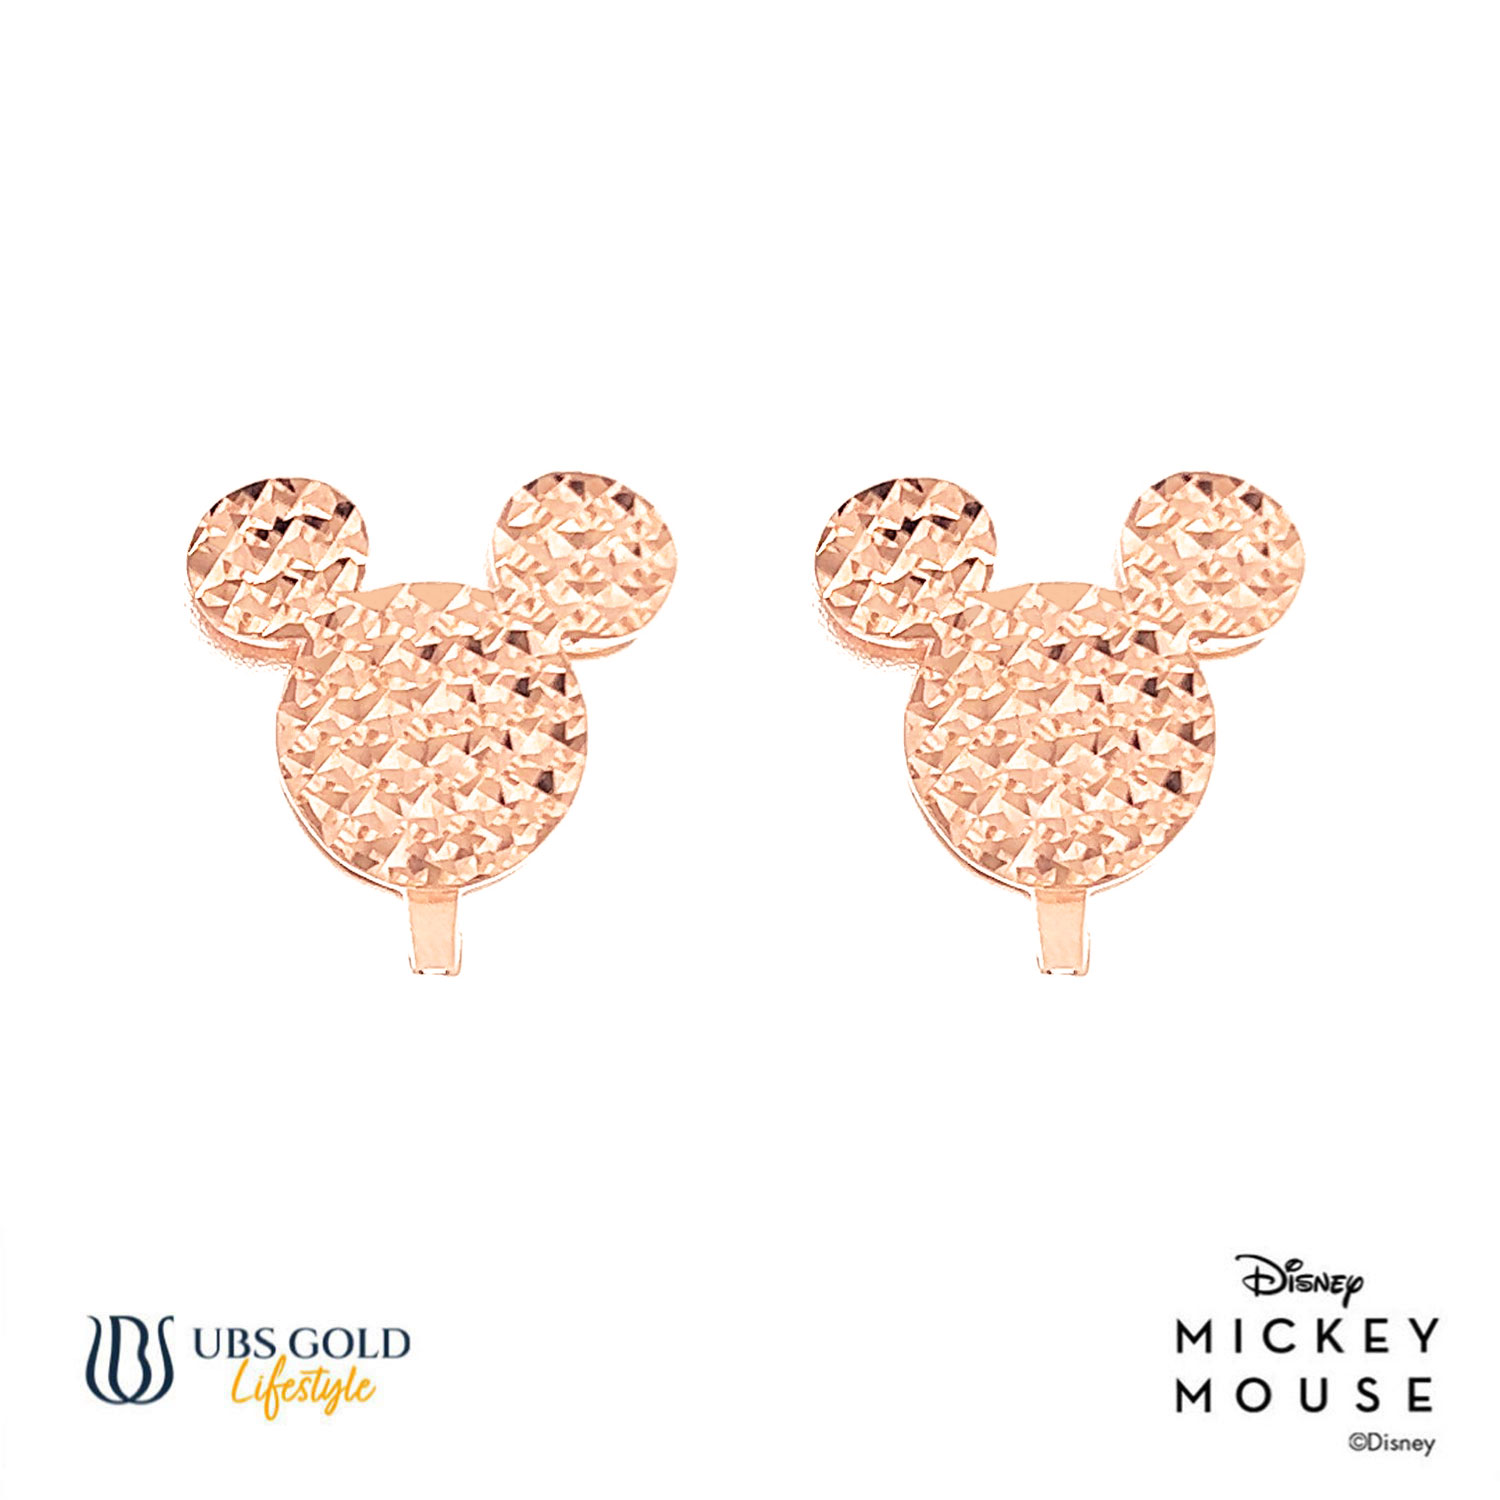 UBS Gold Anting Emas Disney Mickey Mouse - Cay0026 - 17K